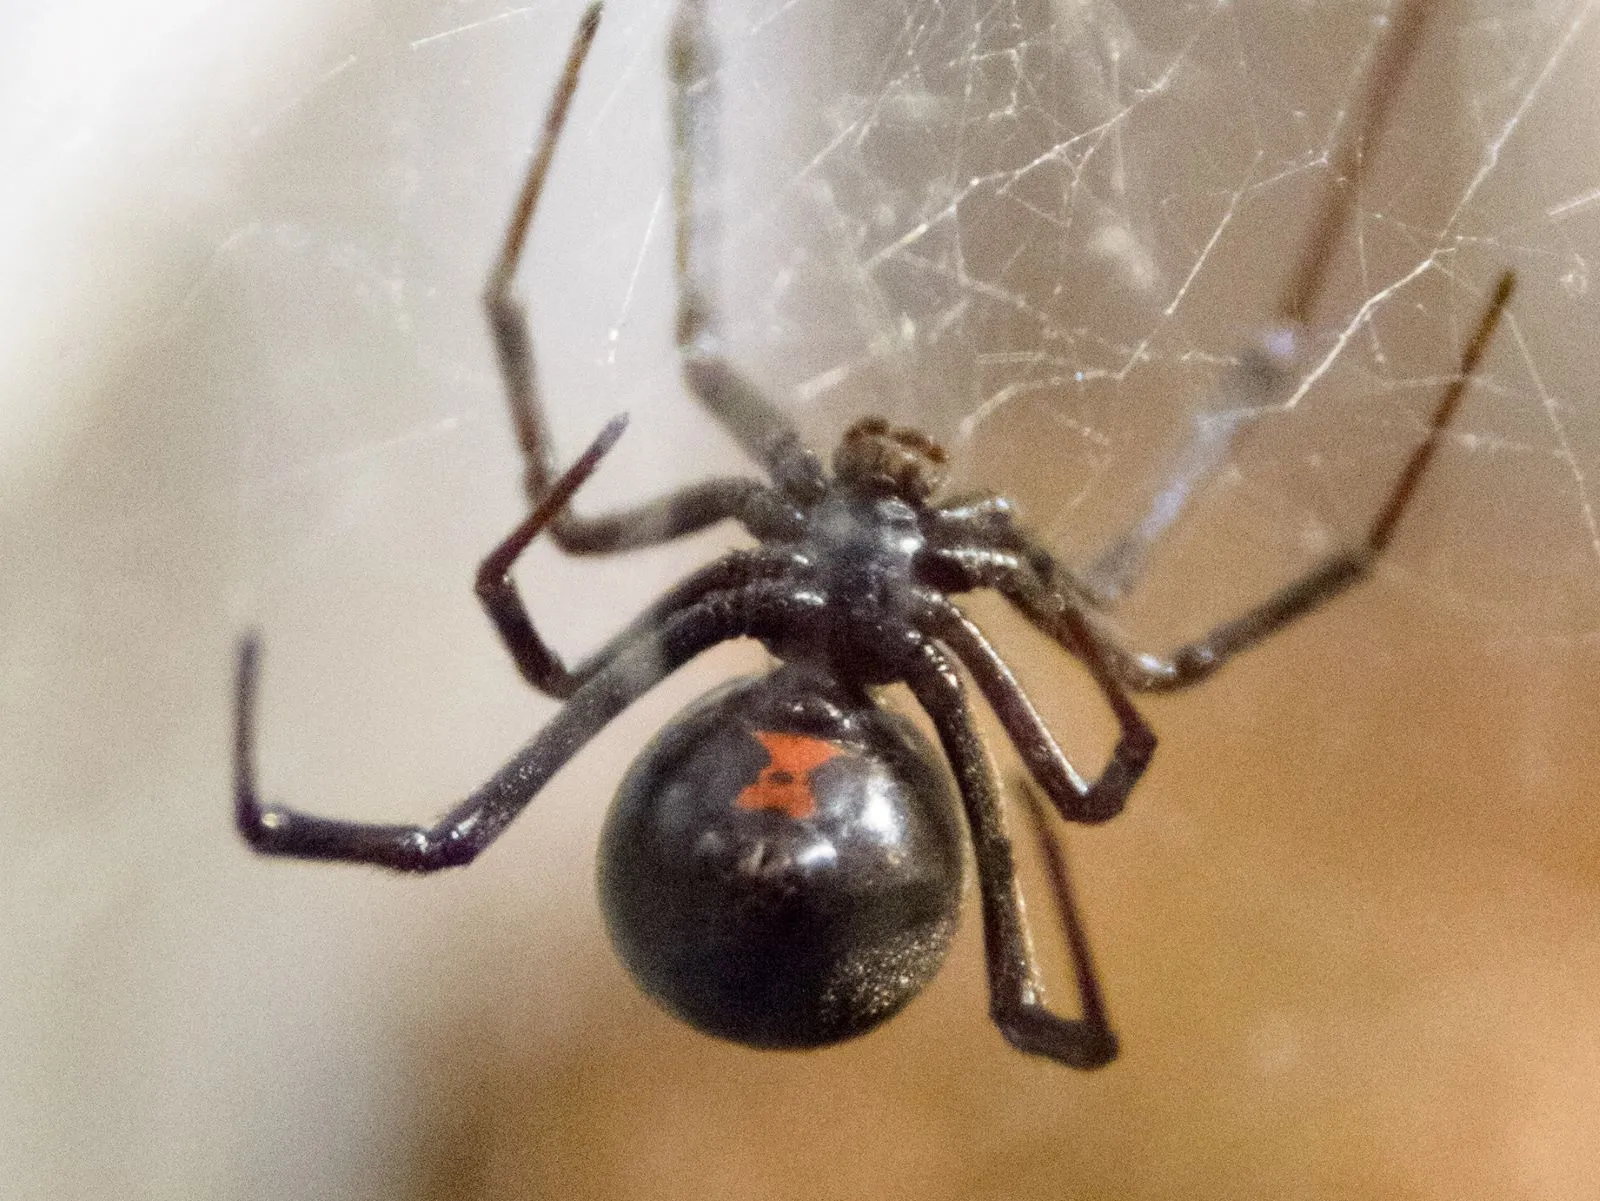 Eight Fun Facts About Black Widows | Science| Smithsonian Magazine